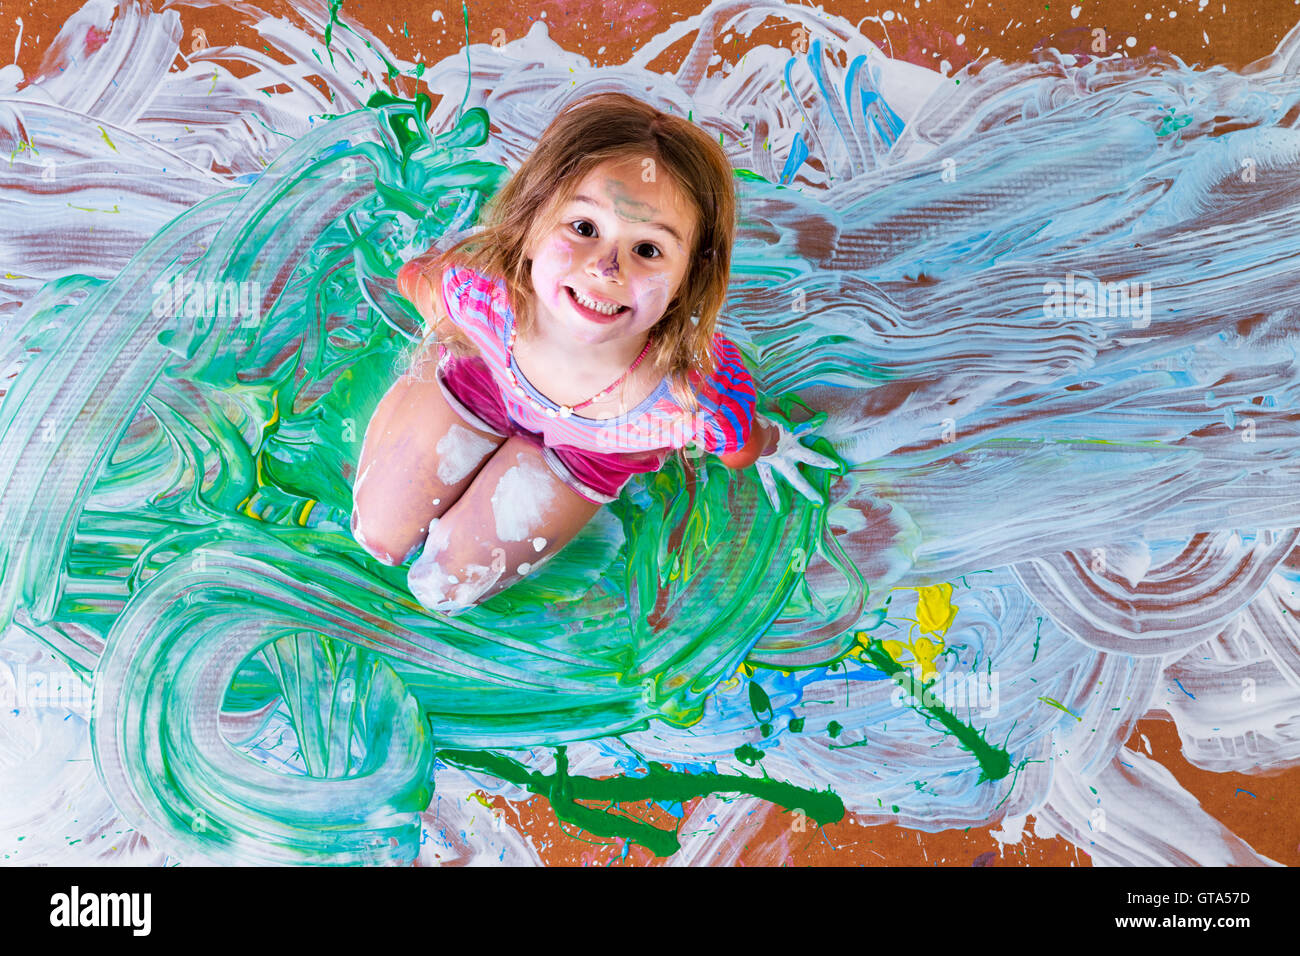 Creative paint splattered little girl having fun with paints kneeling in the center of her artistic modern painting grinning up Stock Photo